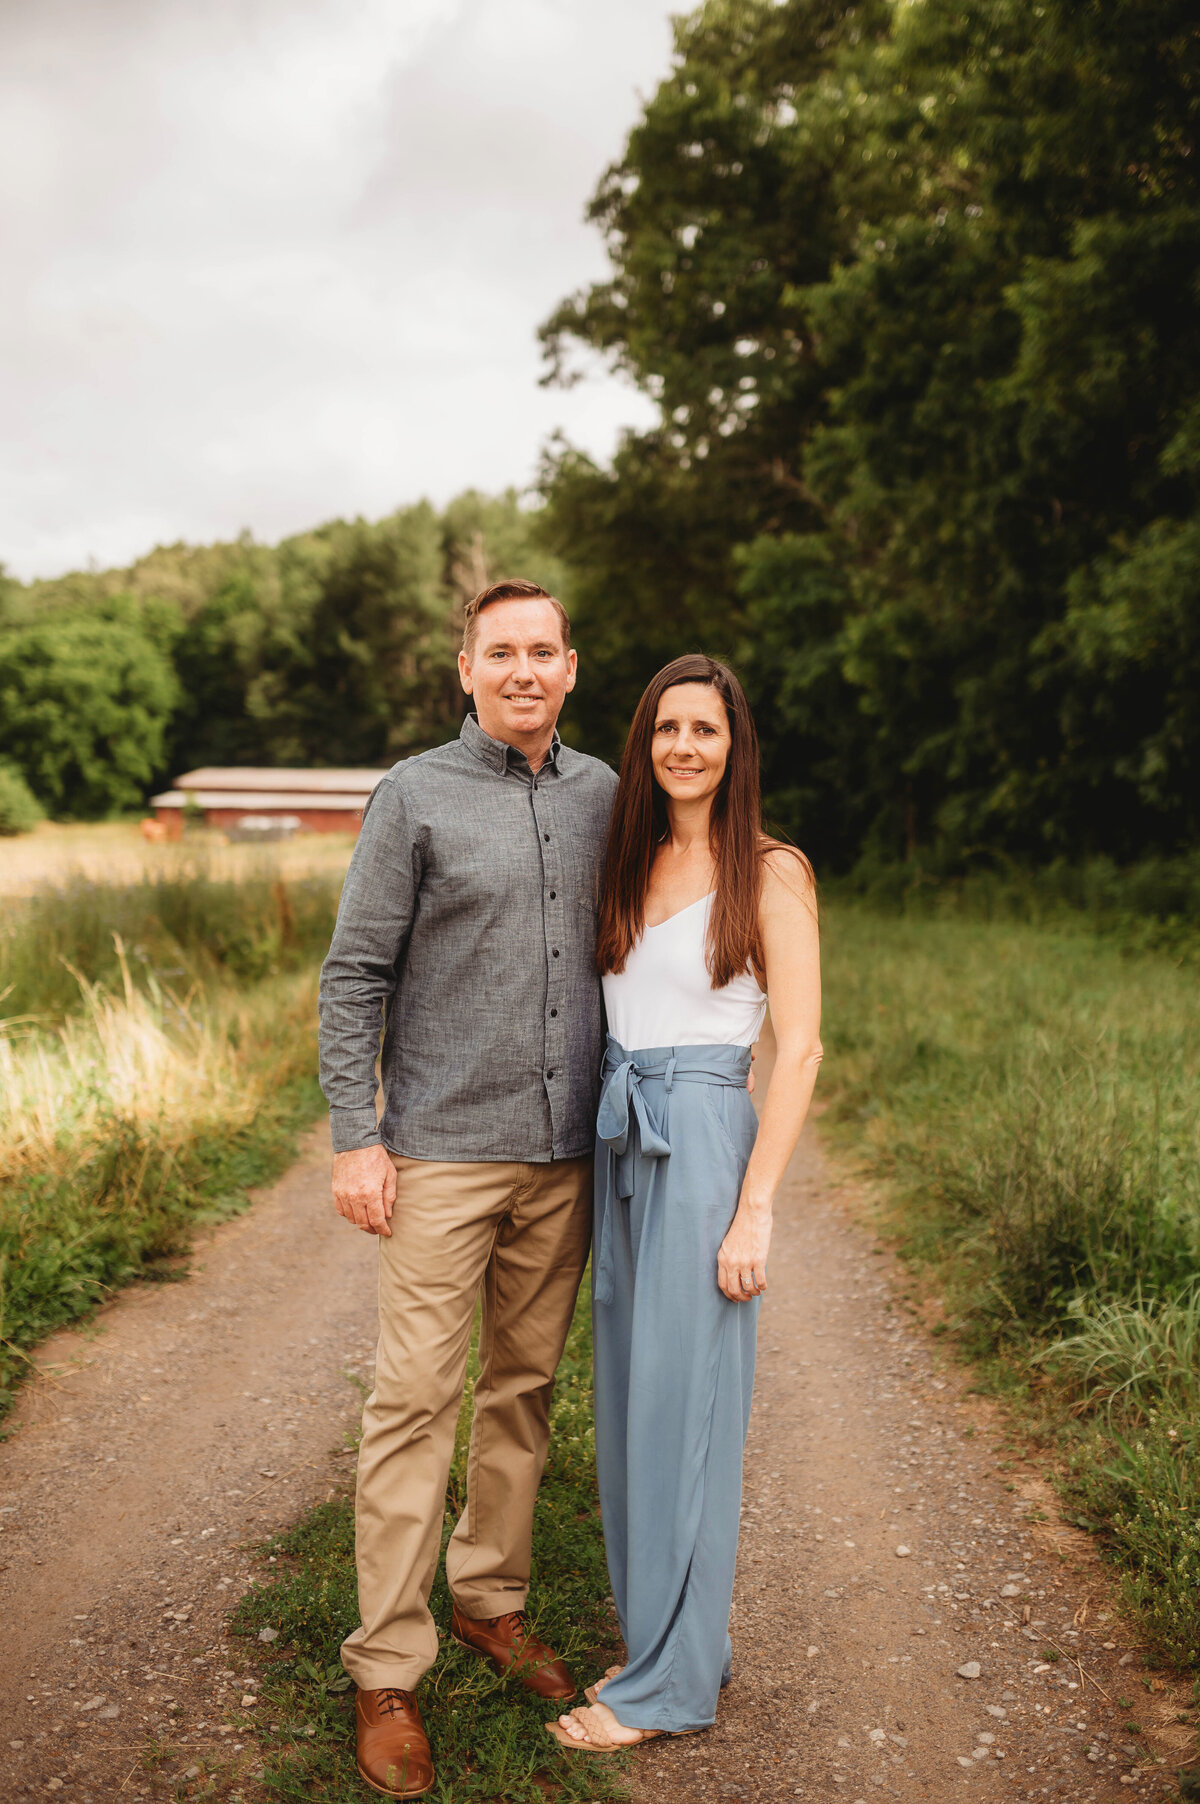 Couple poses for Portraits during an Extended Family Photoshoot in Asheville, NC.